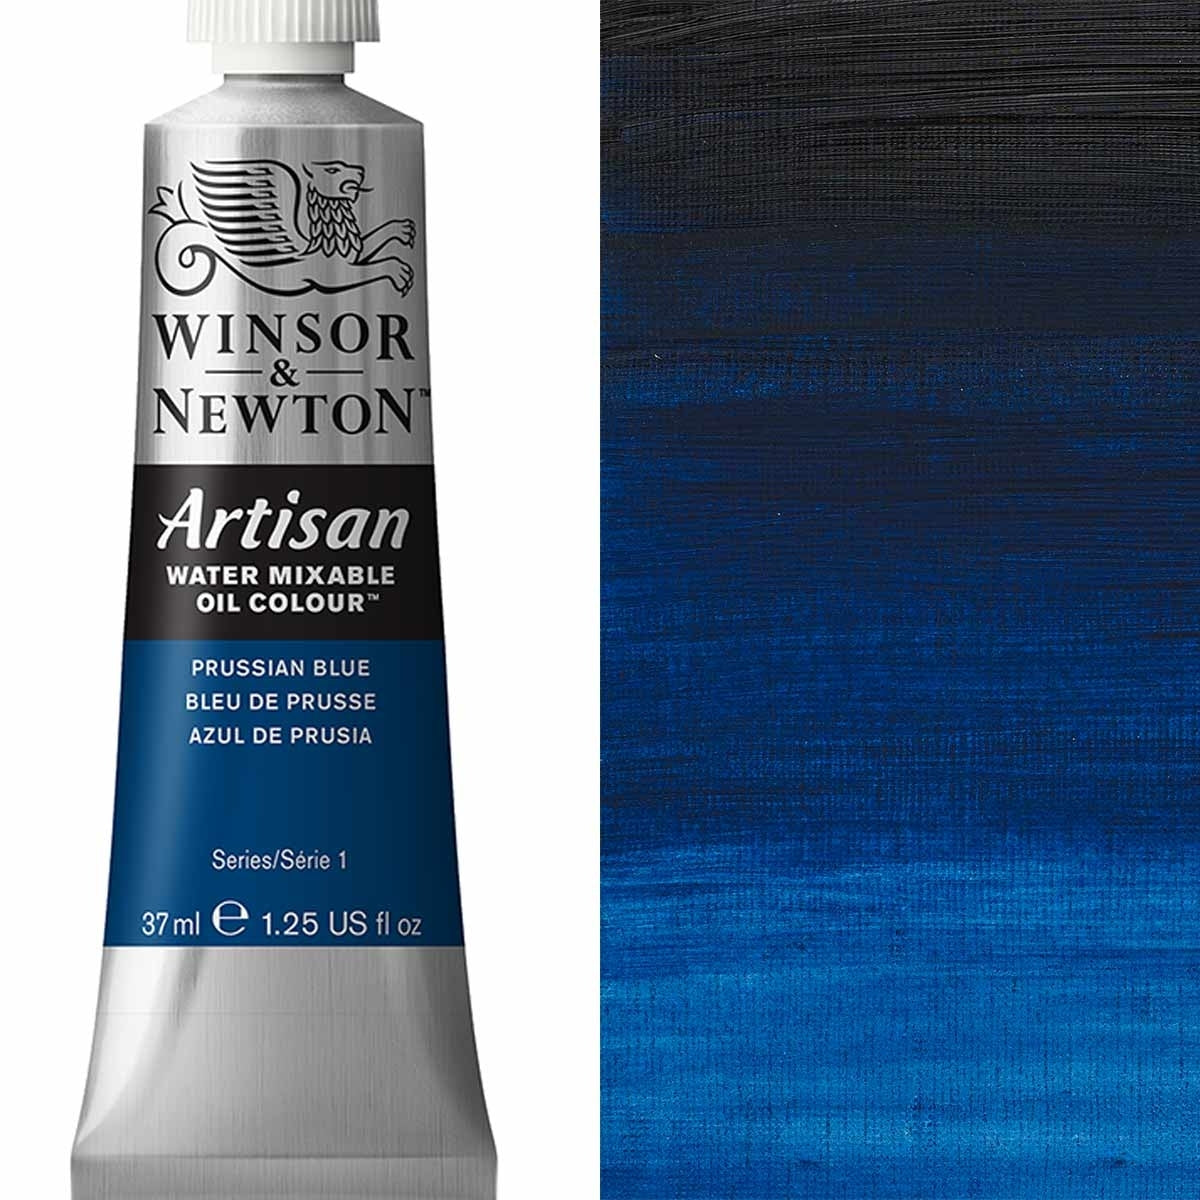 Winsor and Newton - Artisan Oil Colour Watermixable - 37ml - Prussian Blue